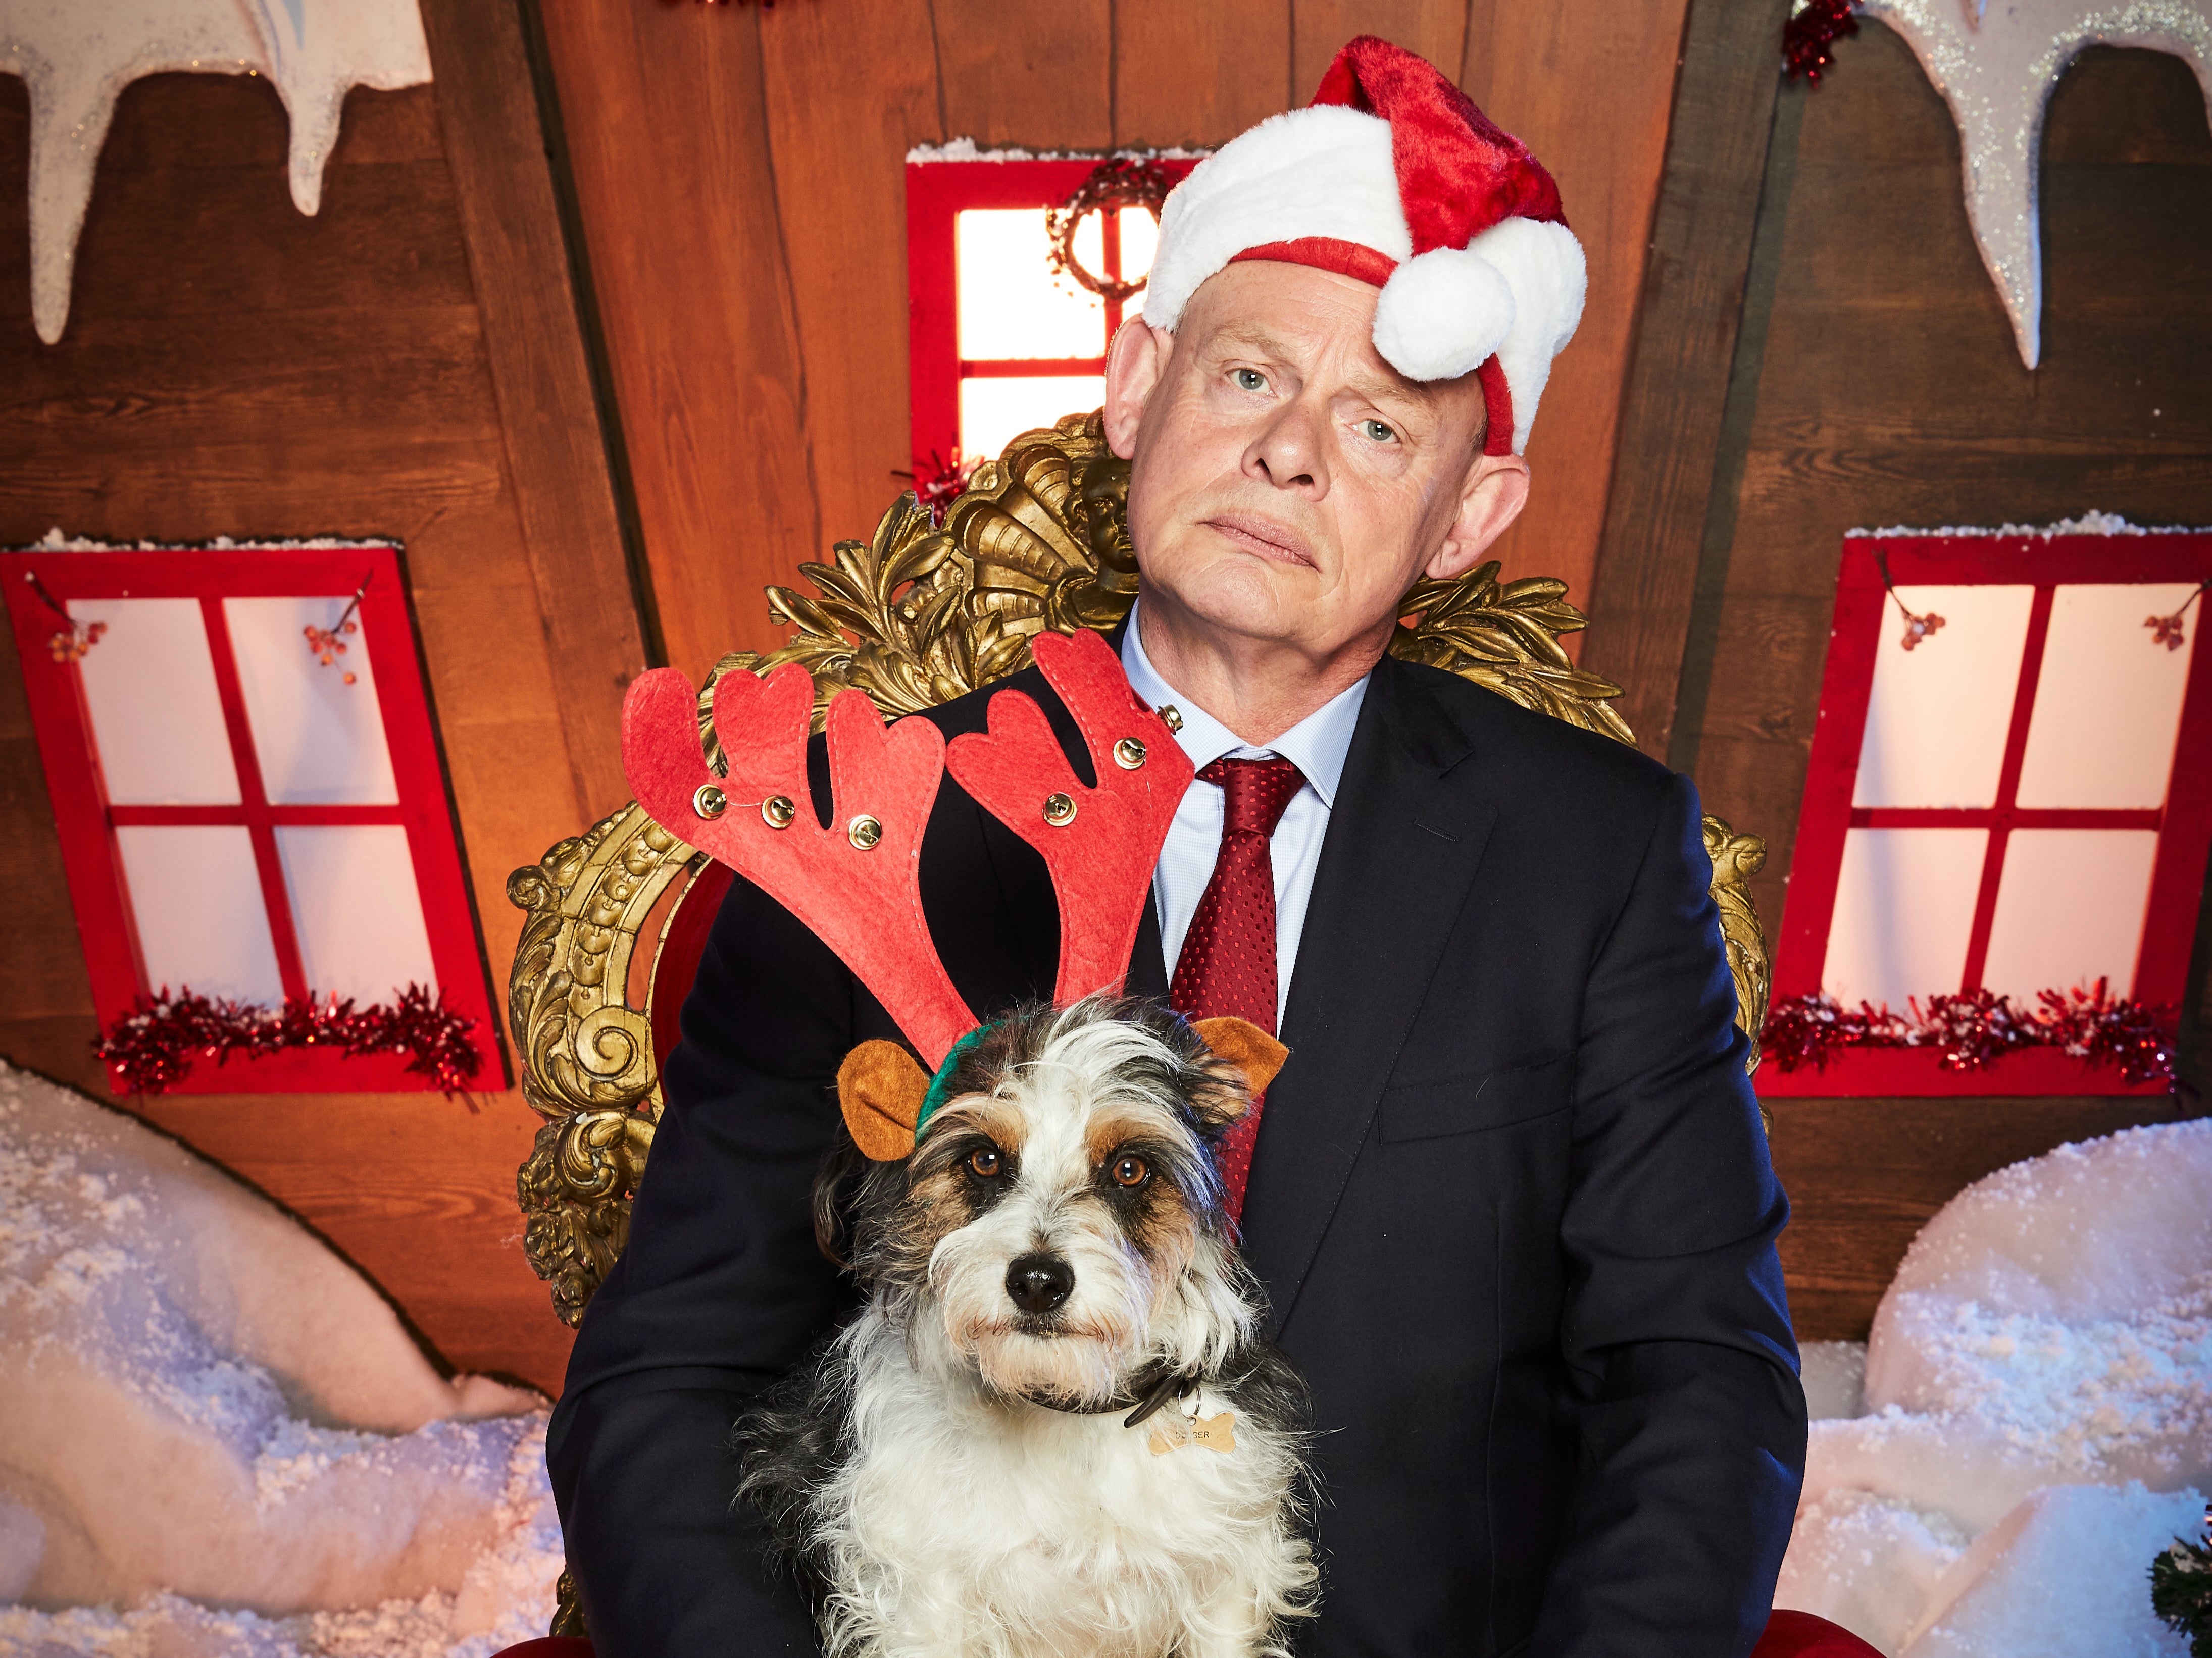 Humbug: Clunes’s last outing as the character comes in a Christmas special